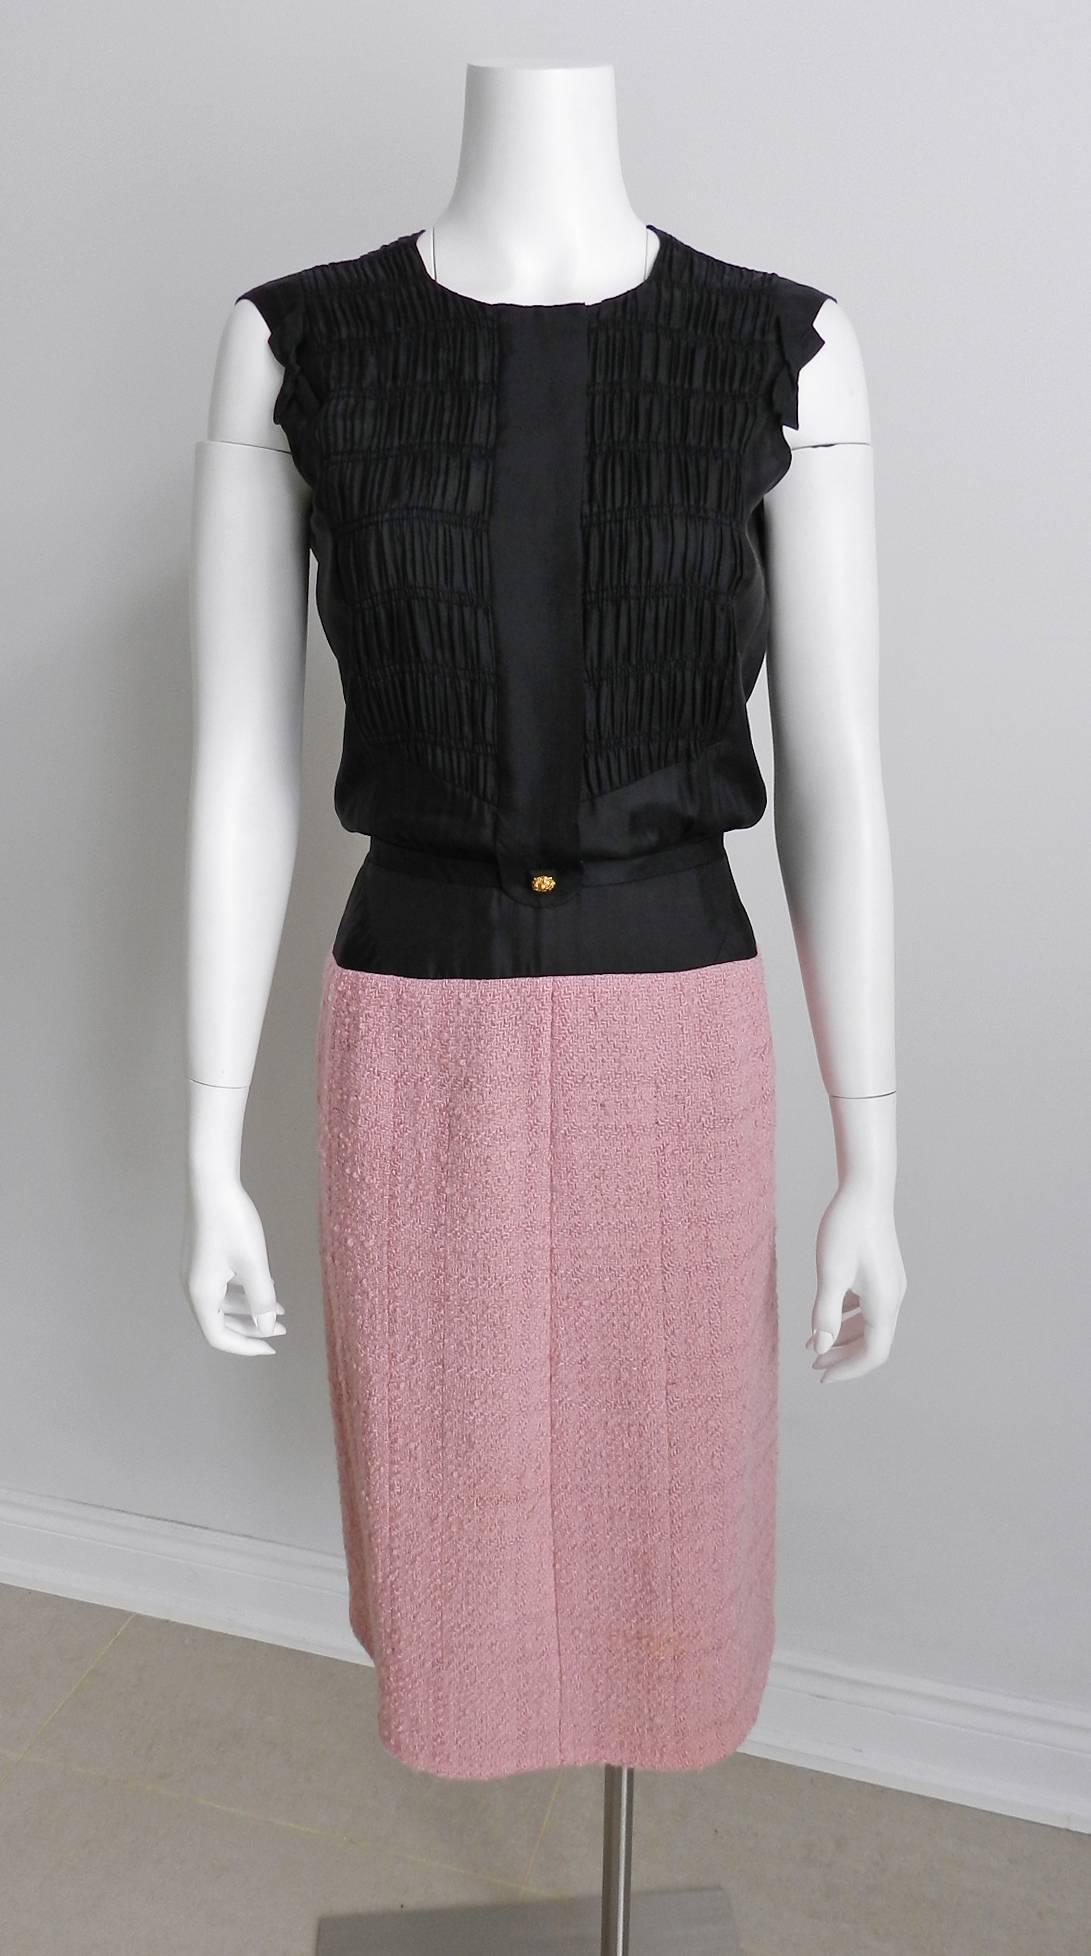 Chanel vintage Spring Summer 1963 Haute Couture pink and black dress and jacket suit.  Numbered under the main label. Pink boucle wool and black silk with gold metal lion head buttons.  The same design can be found in the collection at the